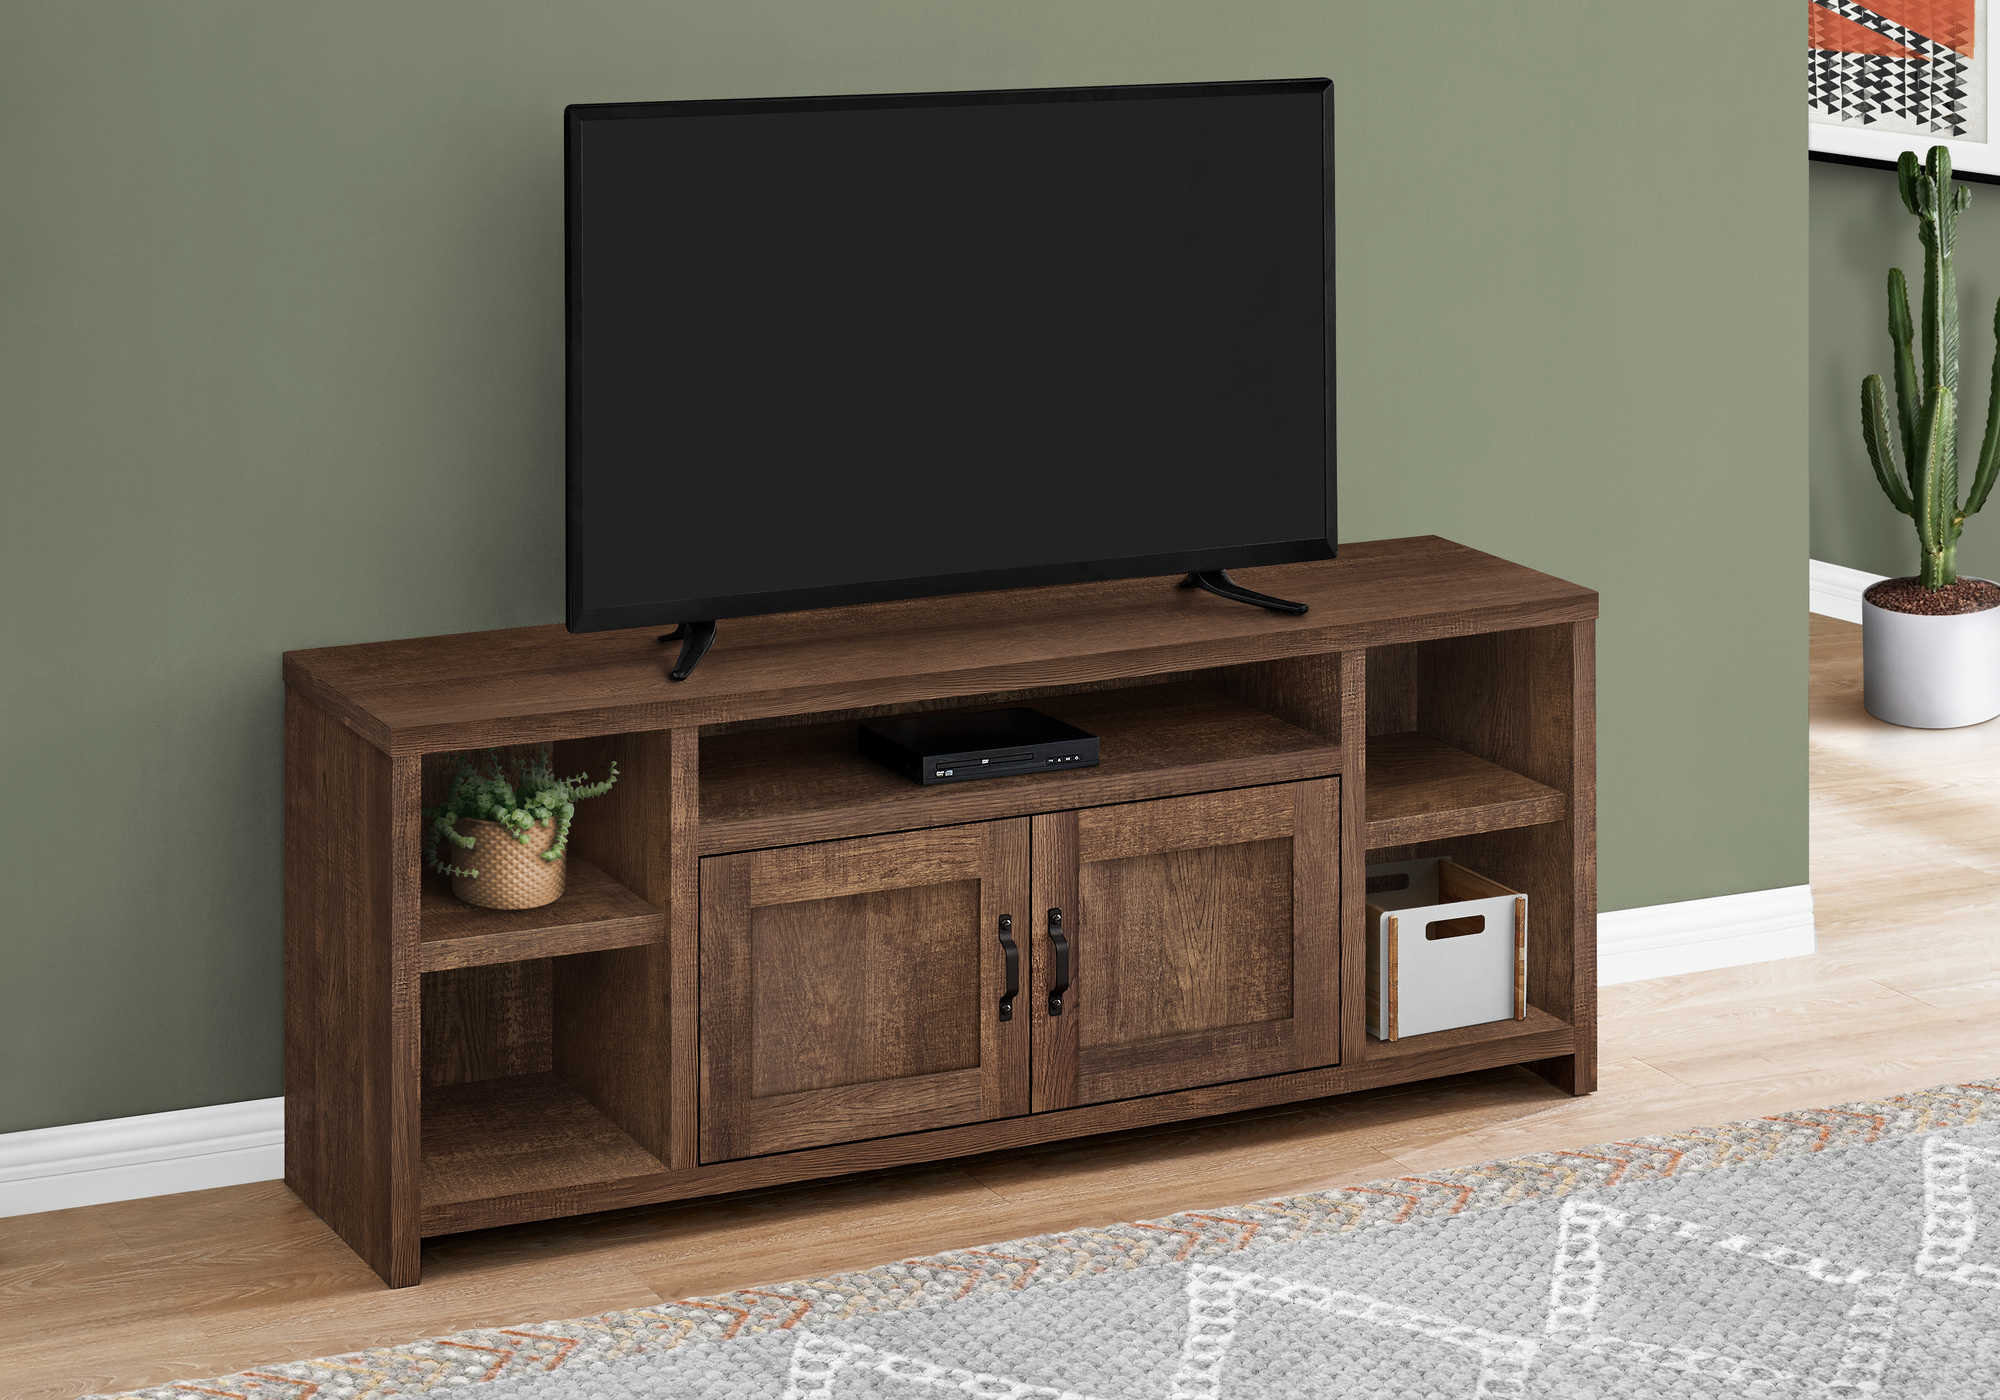 TV STAND - 60"L / BROWN RECLAIMED WOOD-LOOK